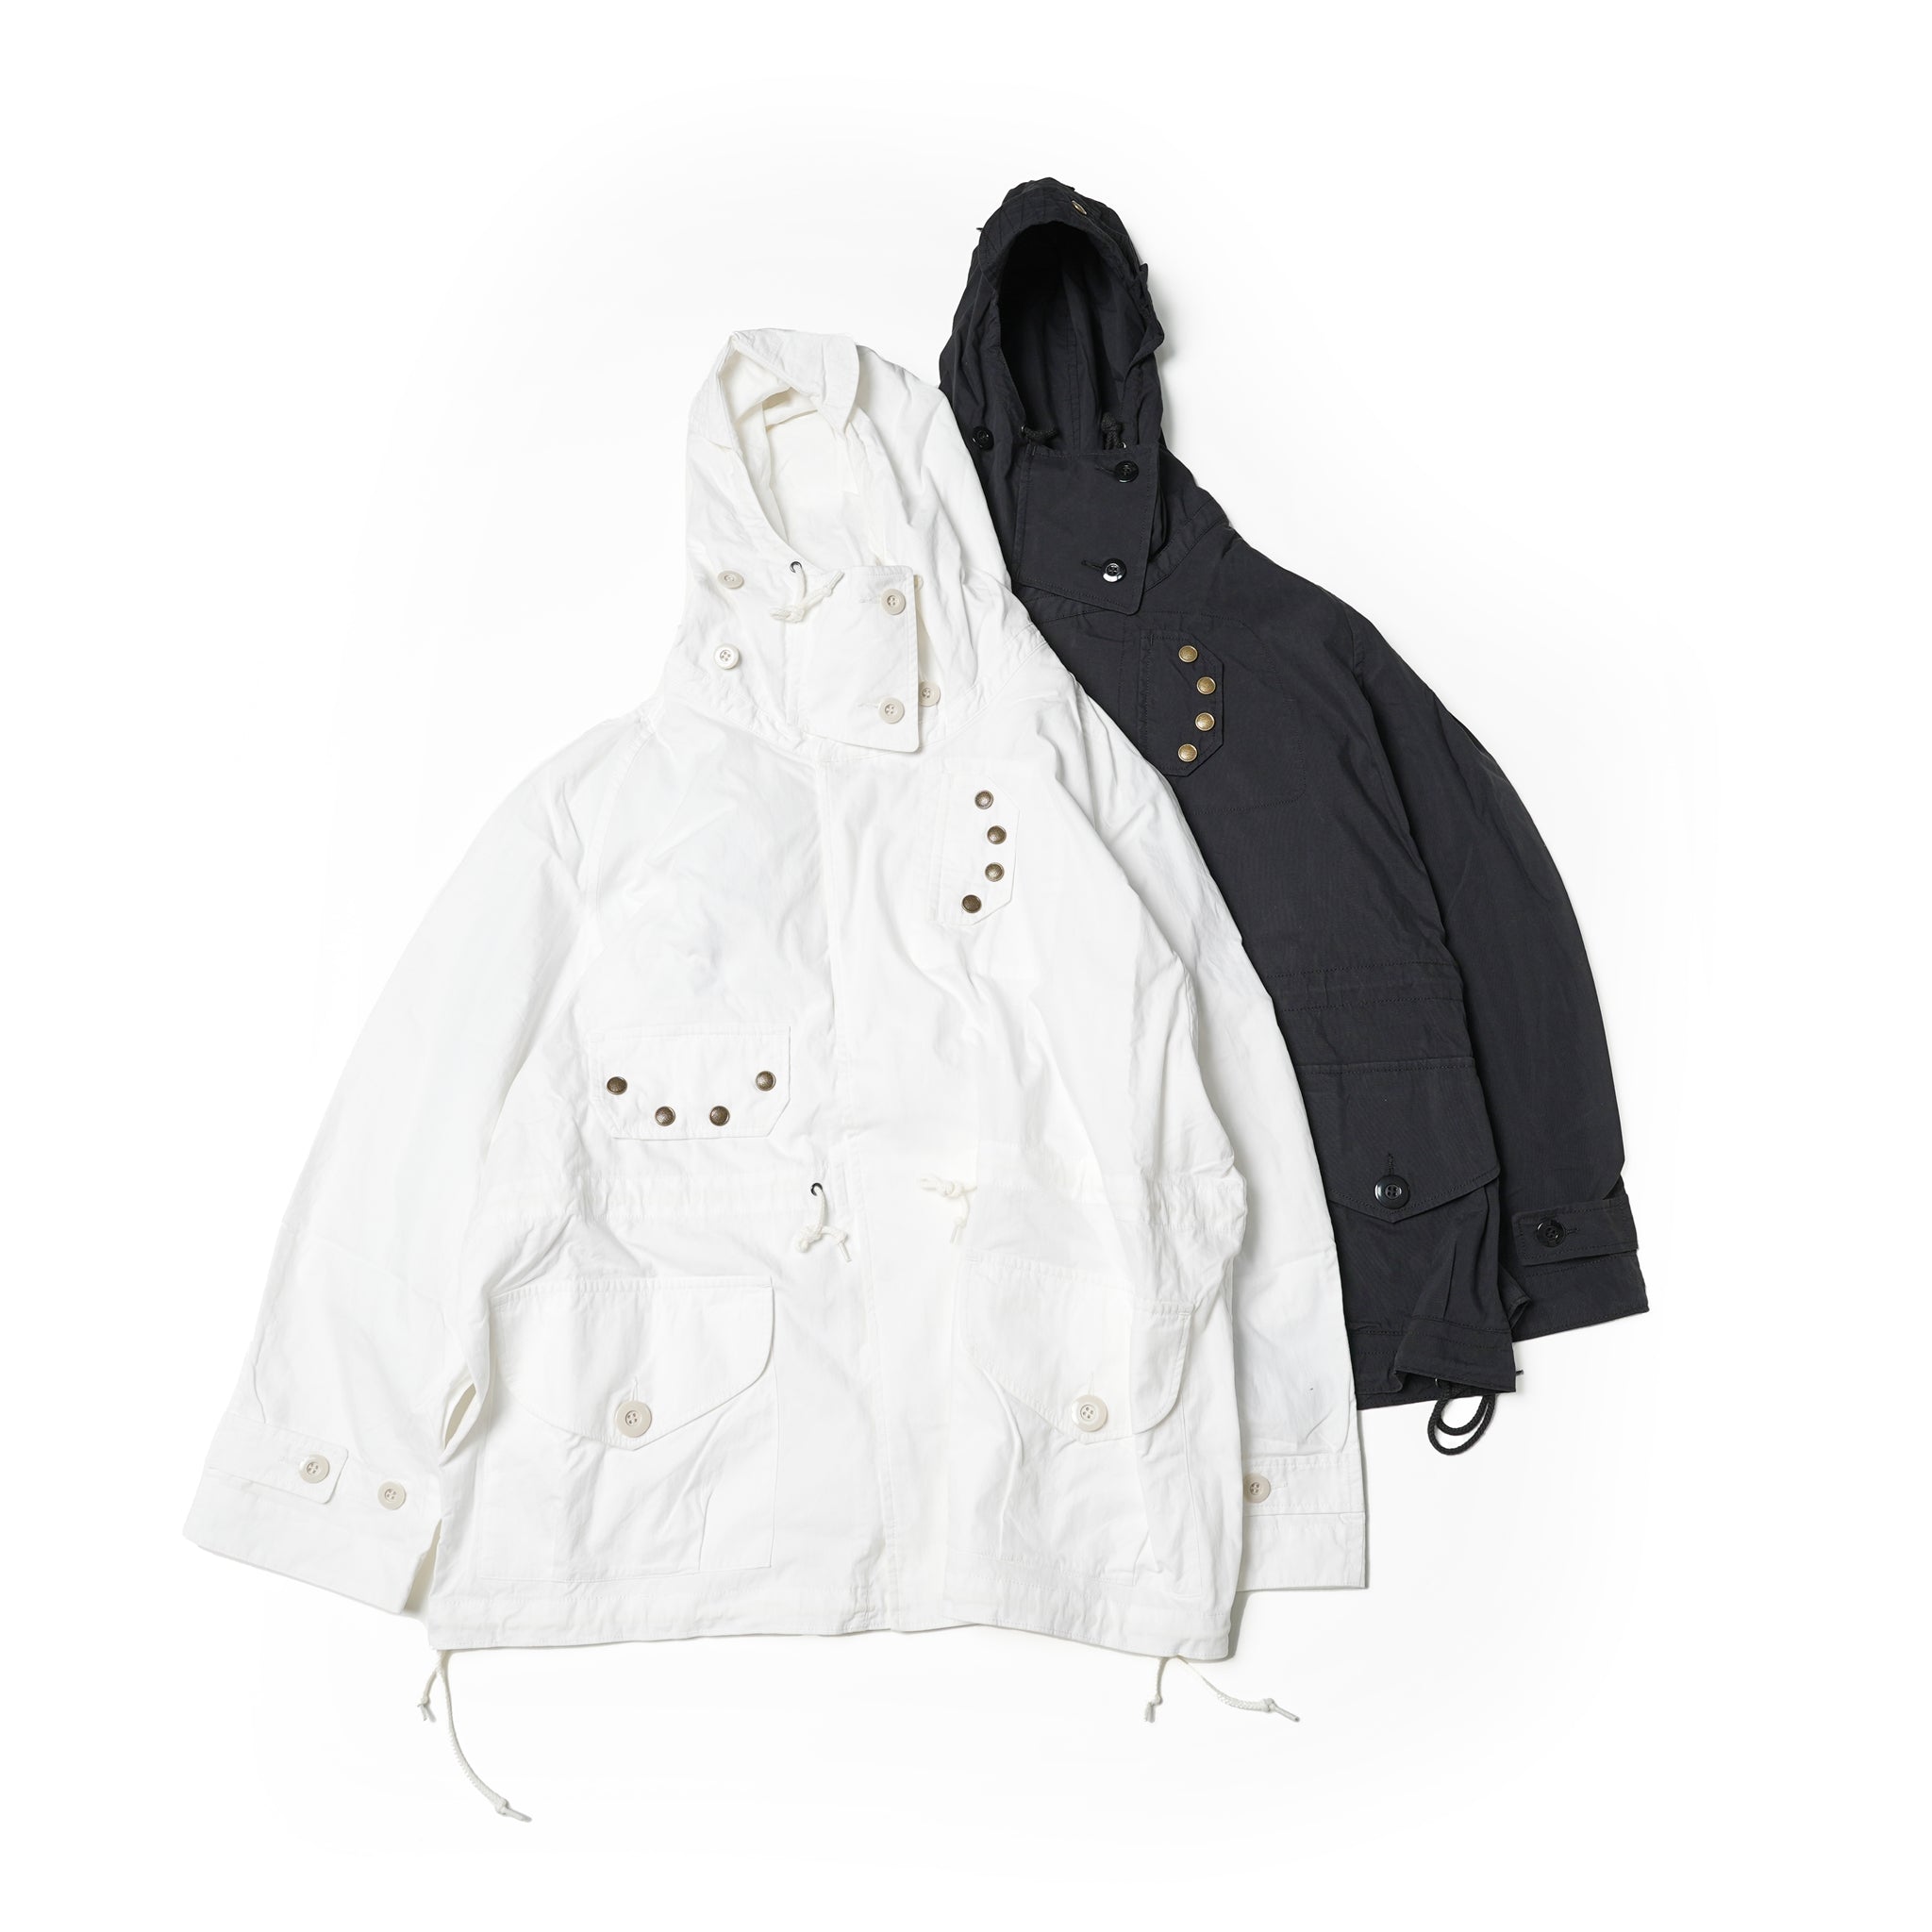 No:AM-2354002 | Name:Cotton Nylon Hooded Coat | Color:White/Black【ARMYTWILL_アーミーツイル】